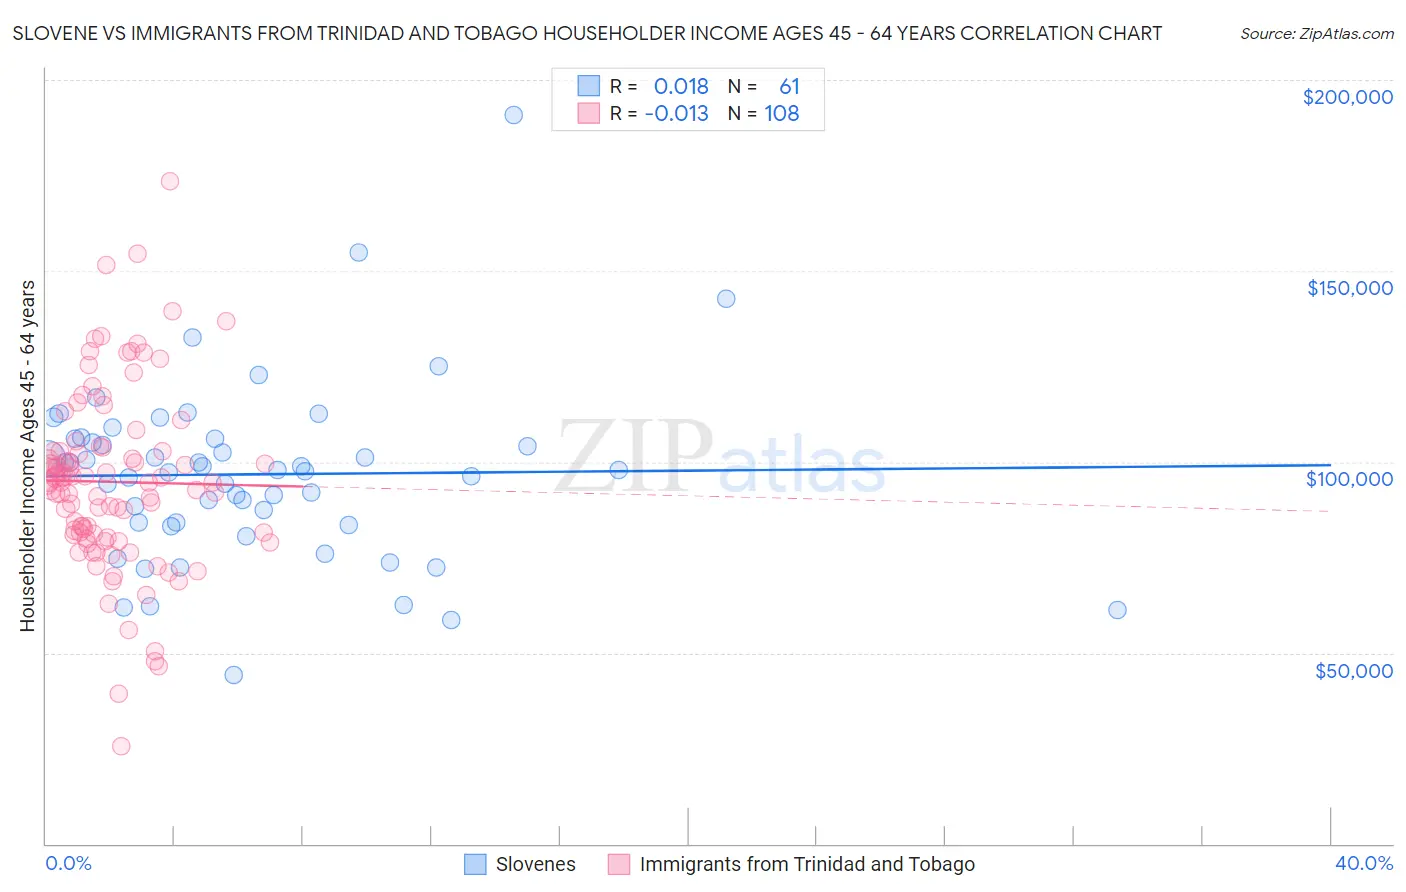 Slovene vs Immigrants from Trinidad and Tobago Householder Income Ages 45 - 64 years